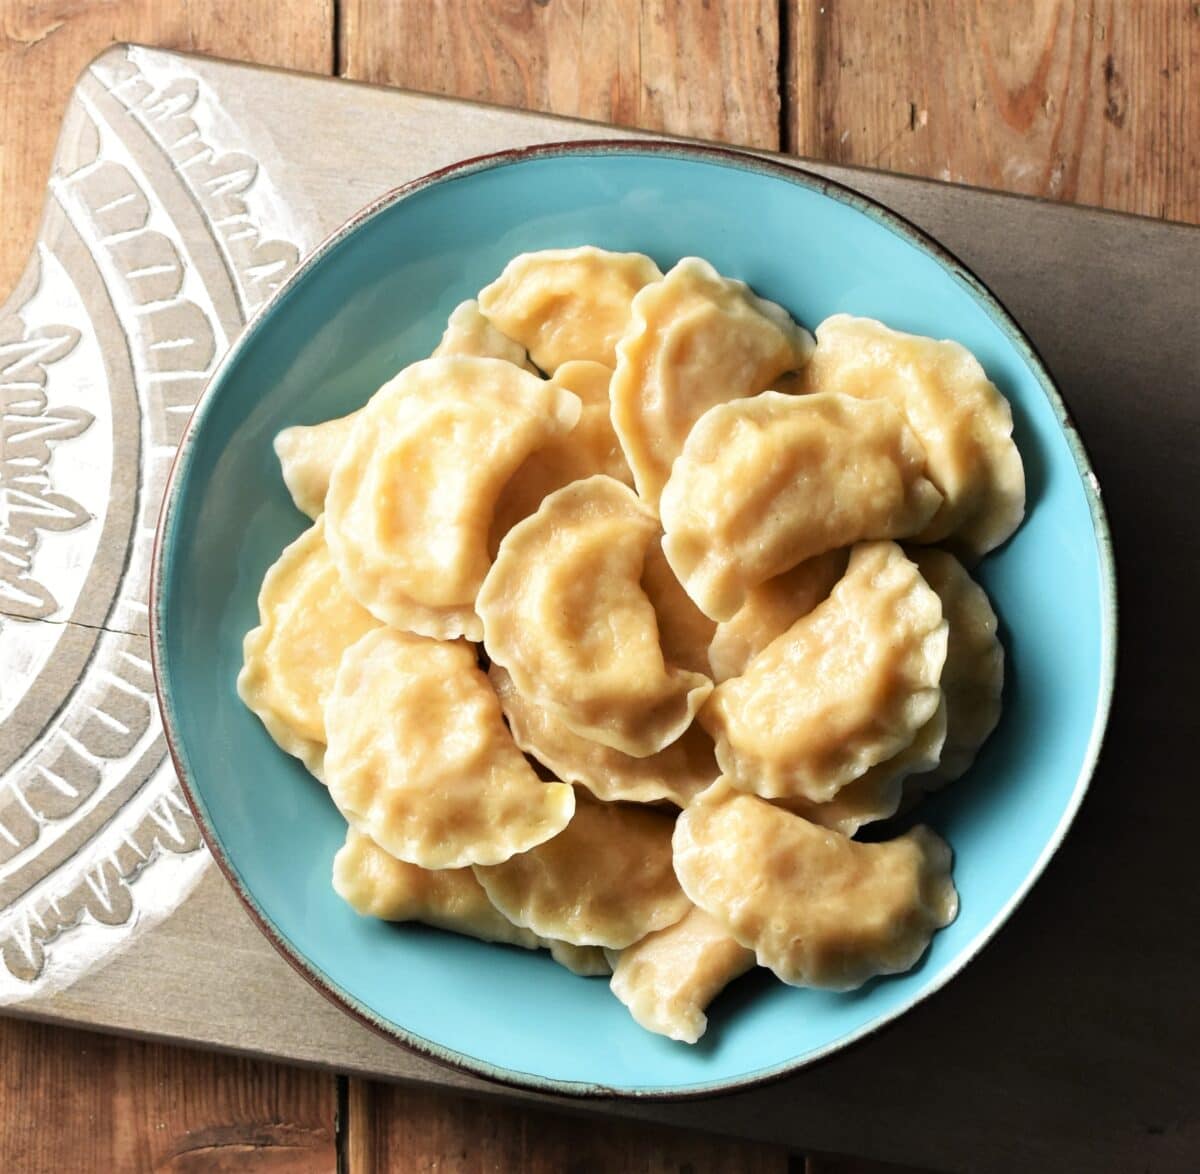 Homemade Perogies with Cheddar and Potatoes